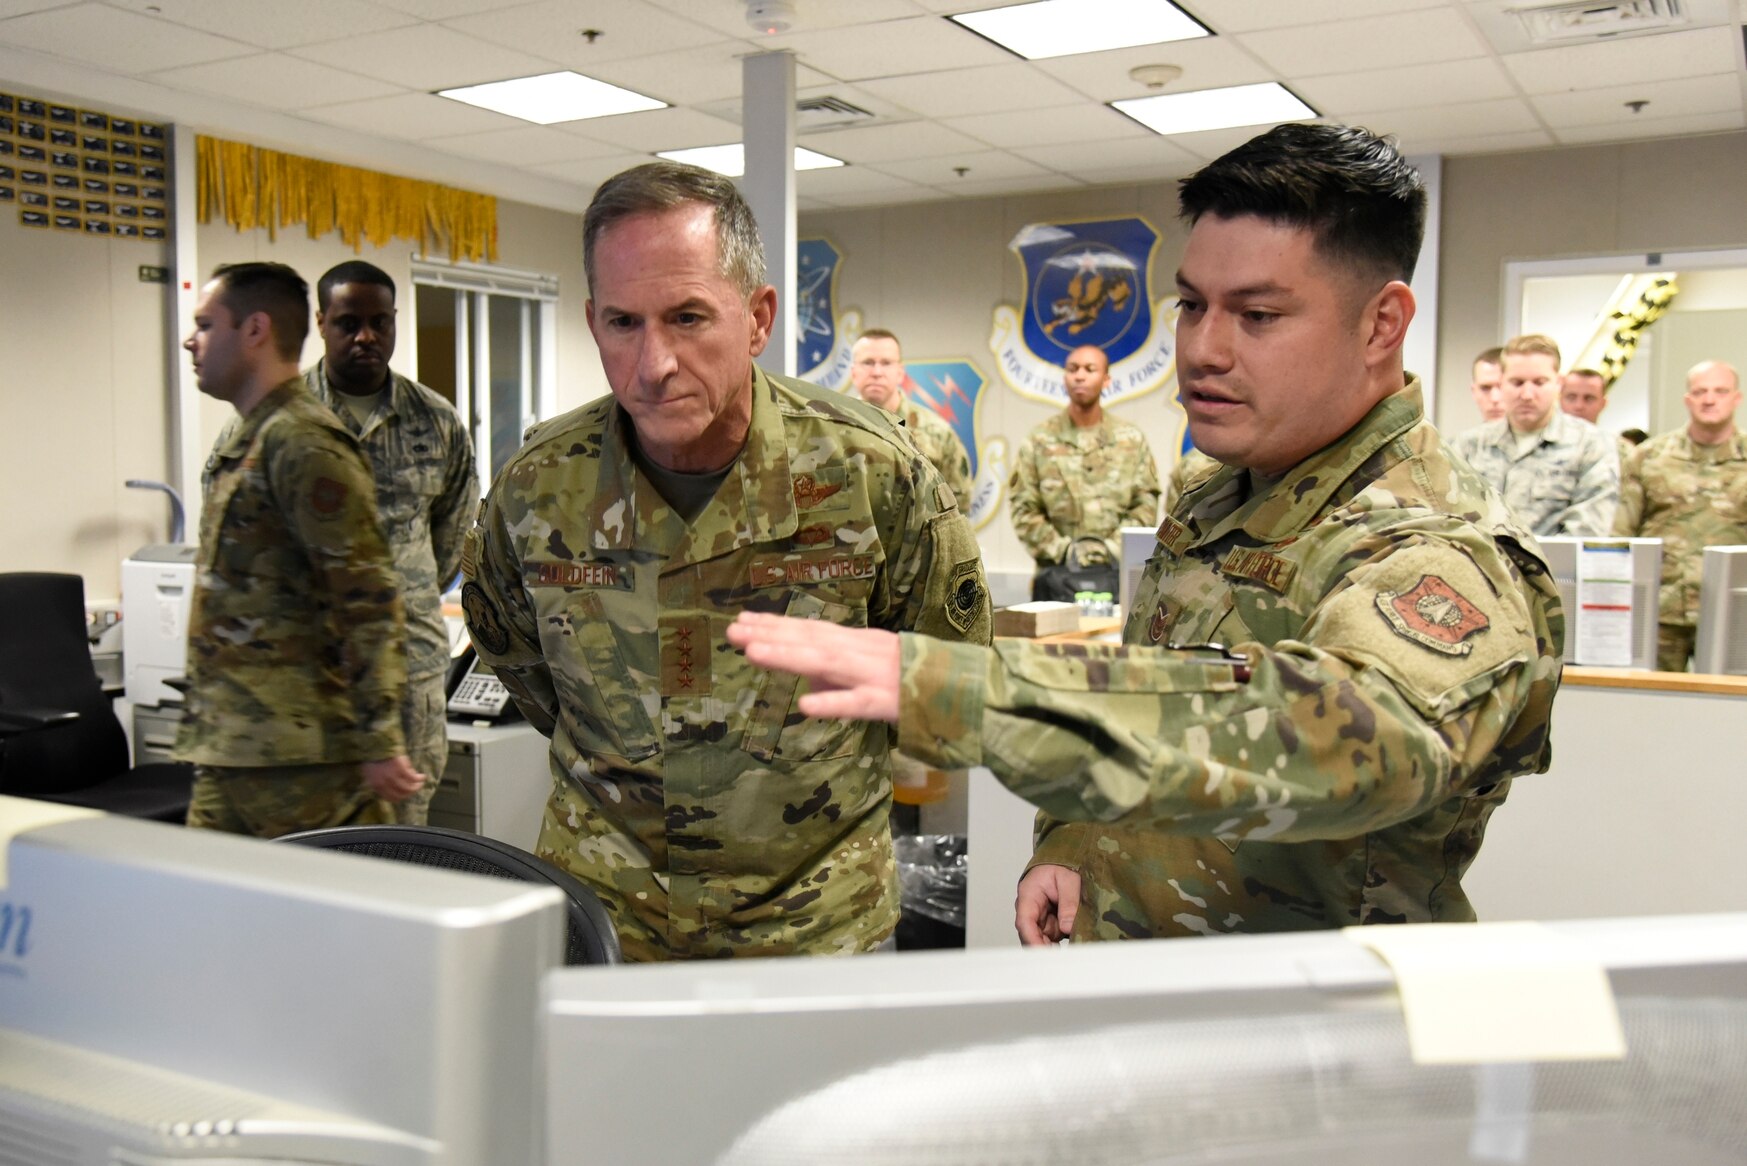 U.S. Air Force Chief of Staff Gen. Dave Goldfein is briefed by an airman from the 12th Space Warning Squadron at Thule Air Base, 